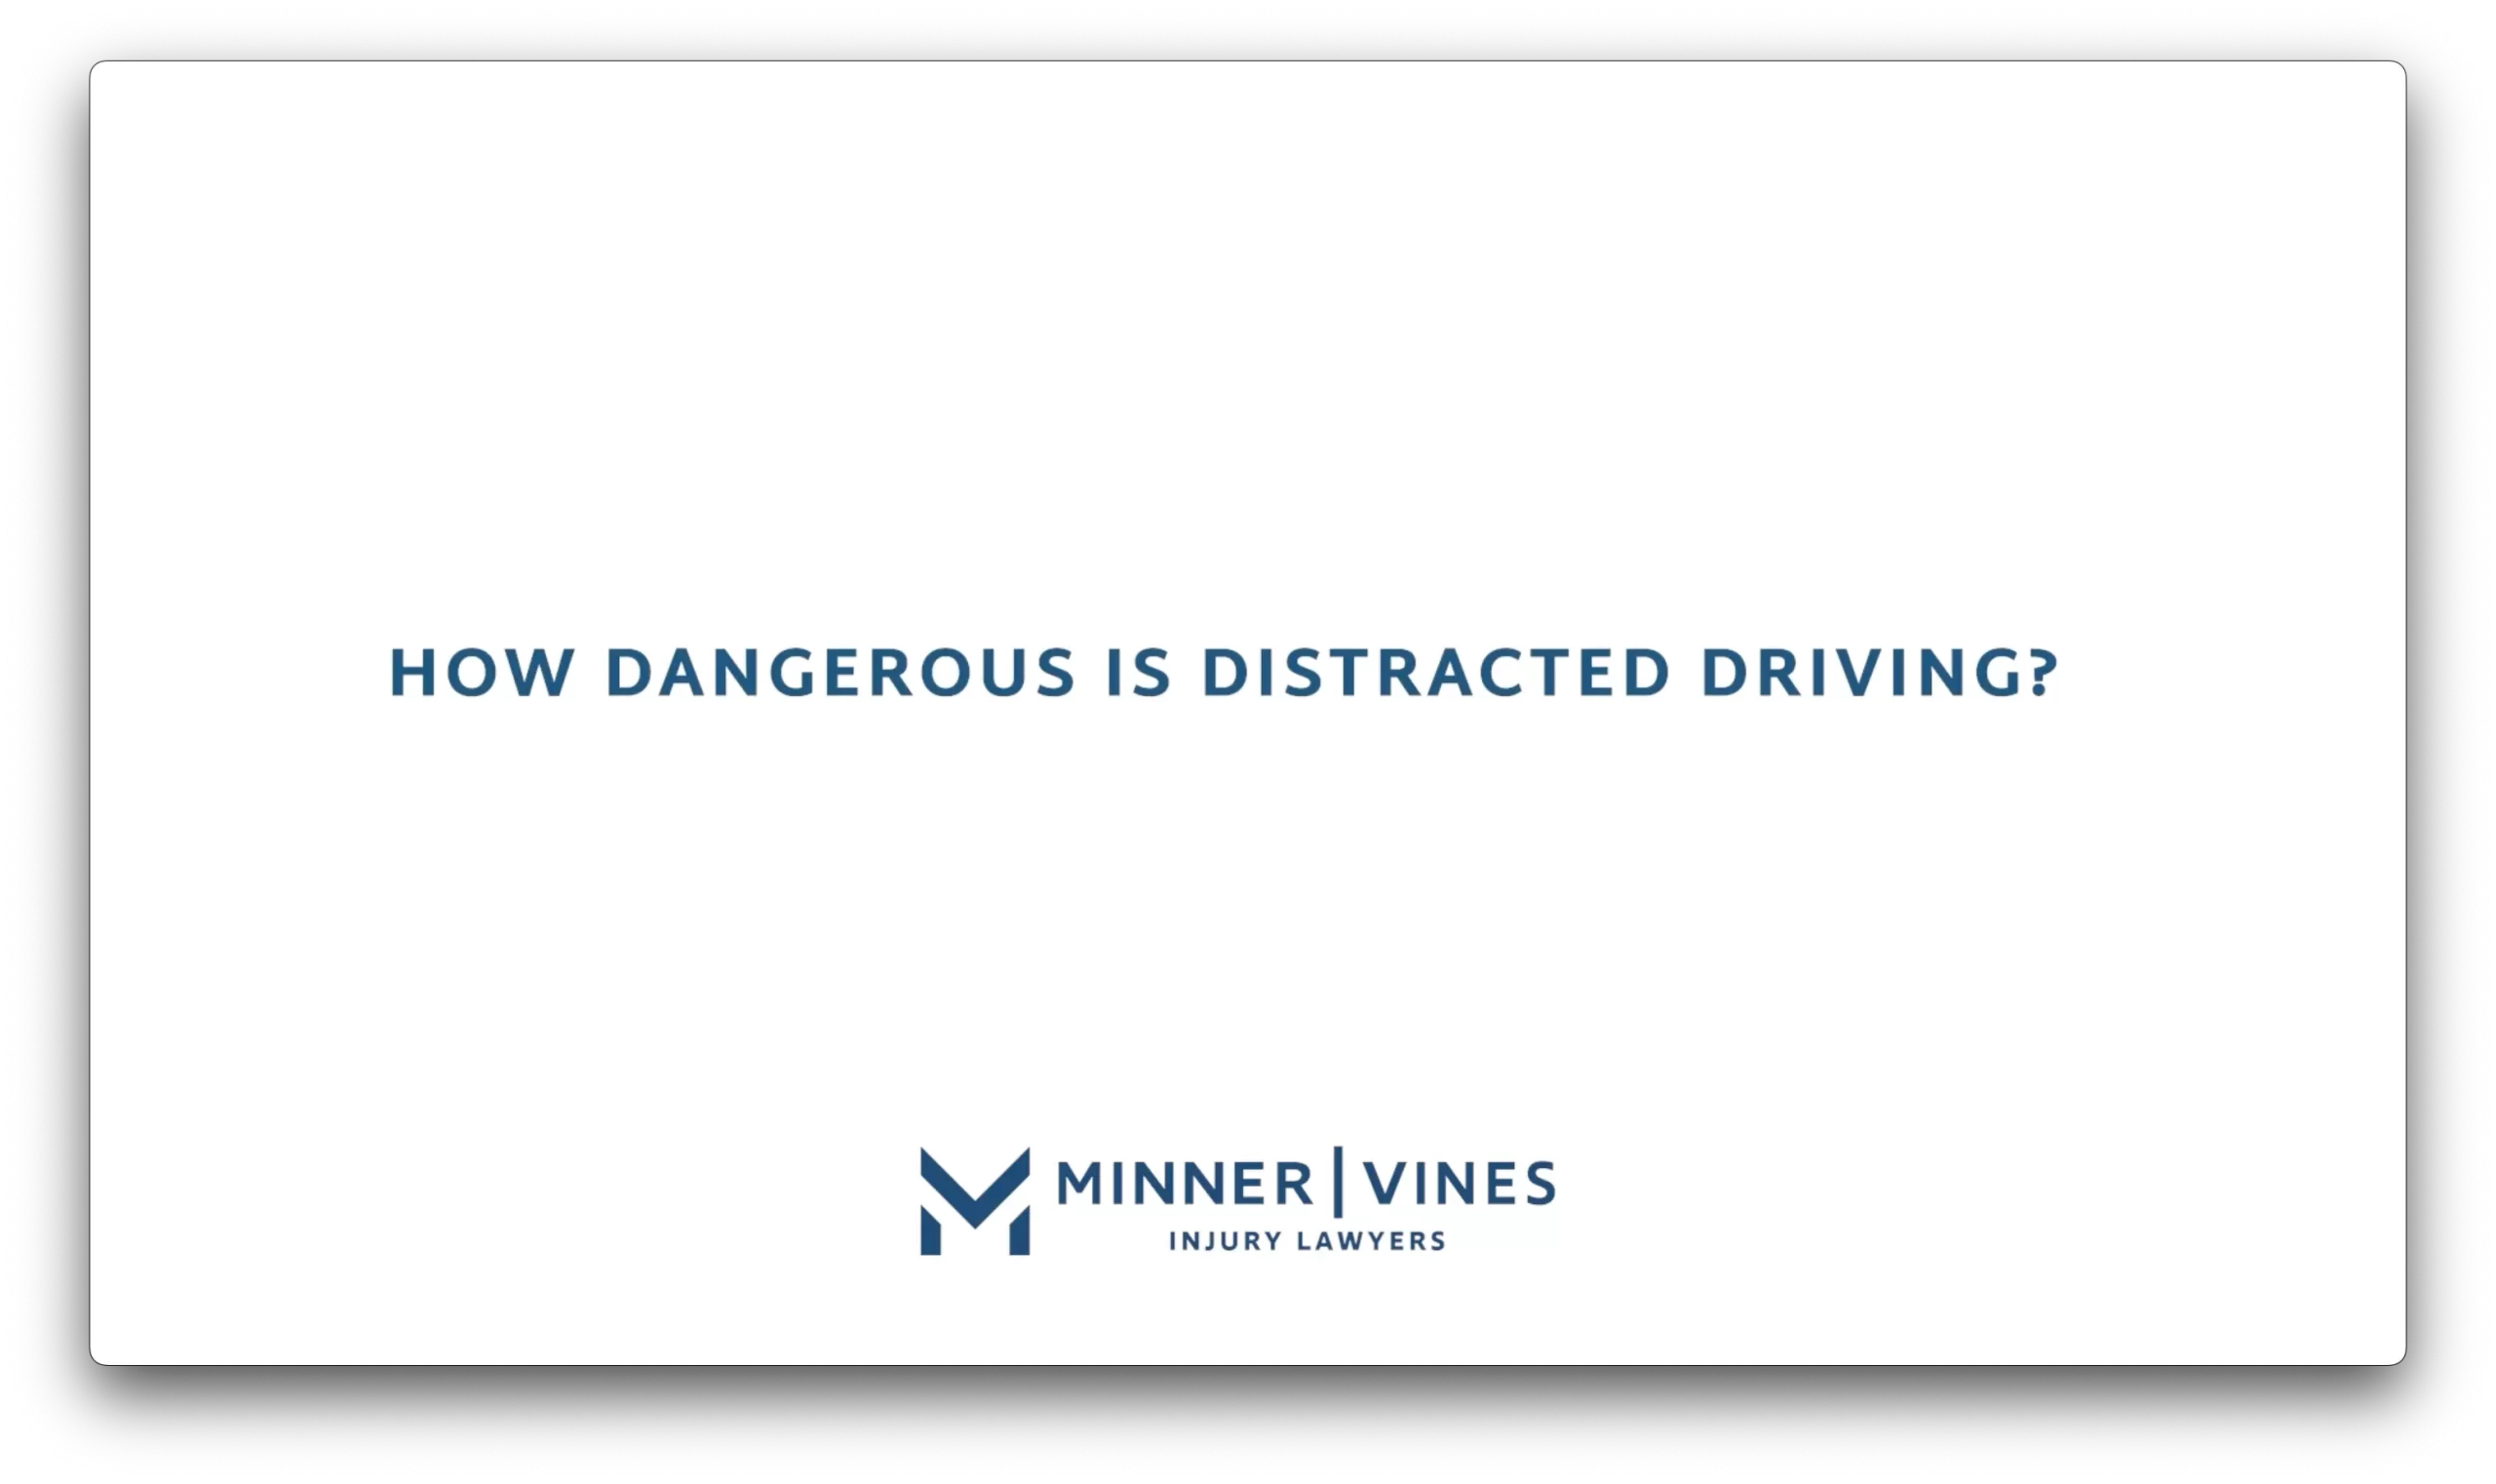 How dangerous is distracted driving?